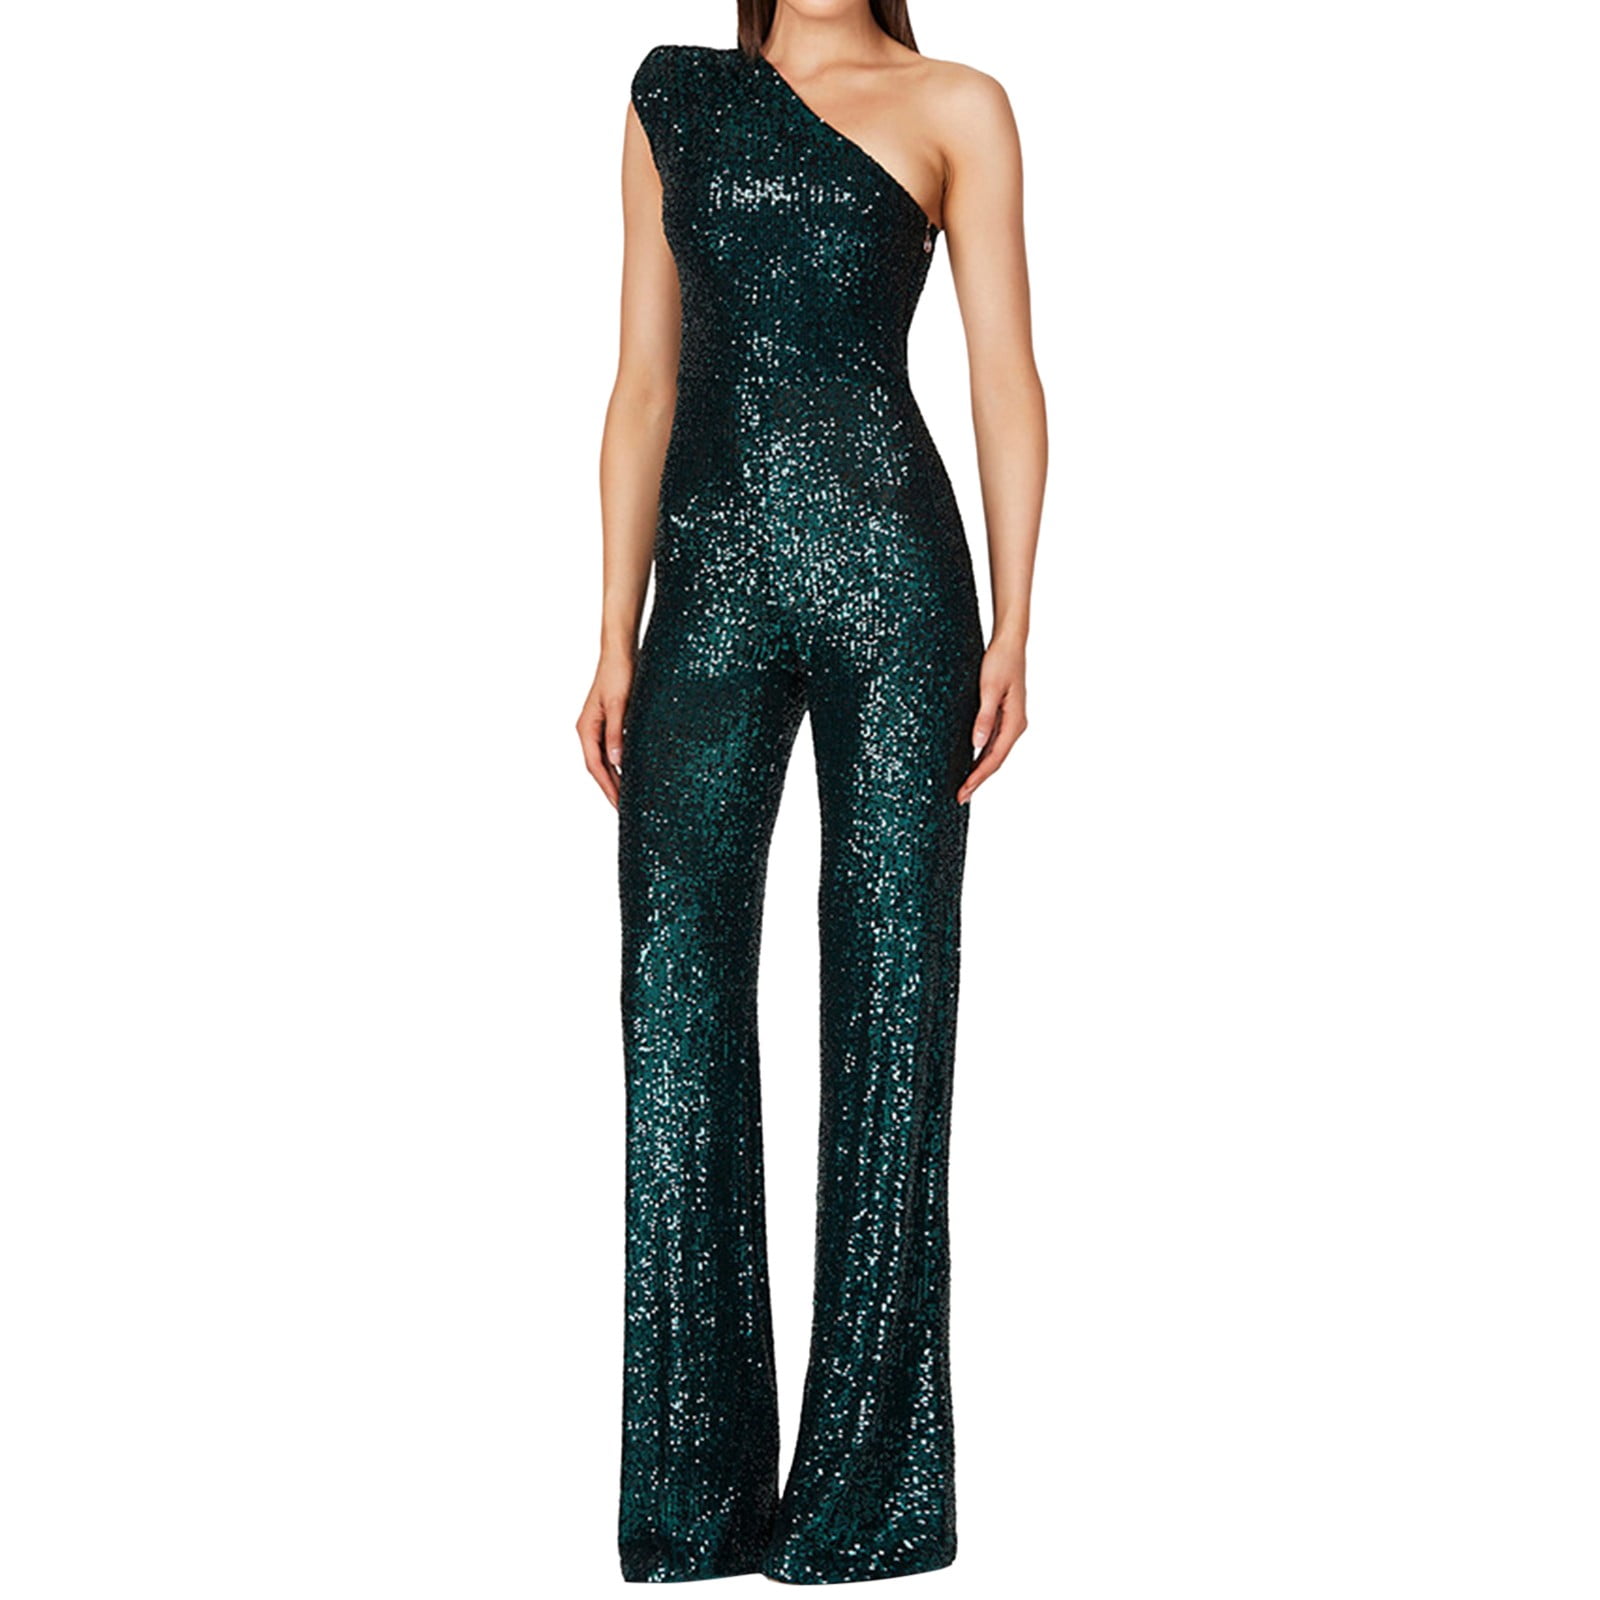 Flare Jumpsuits for Women Spaghetti Straps Scoop Neck Bodycon Full Length  Casual Unitard Playsuit